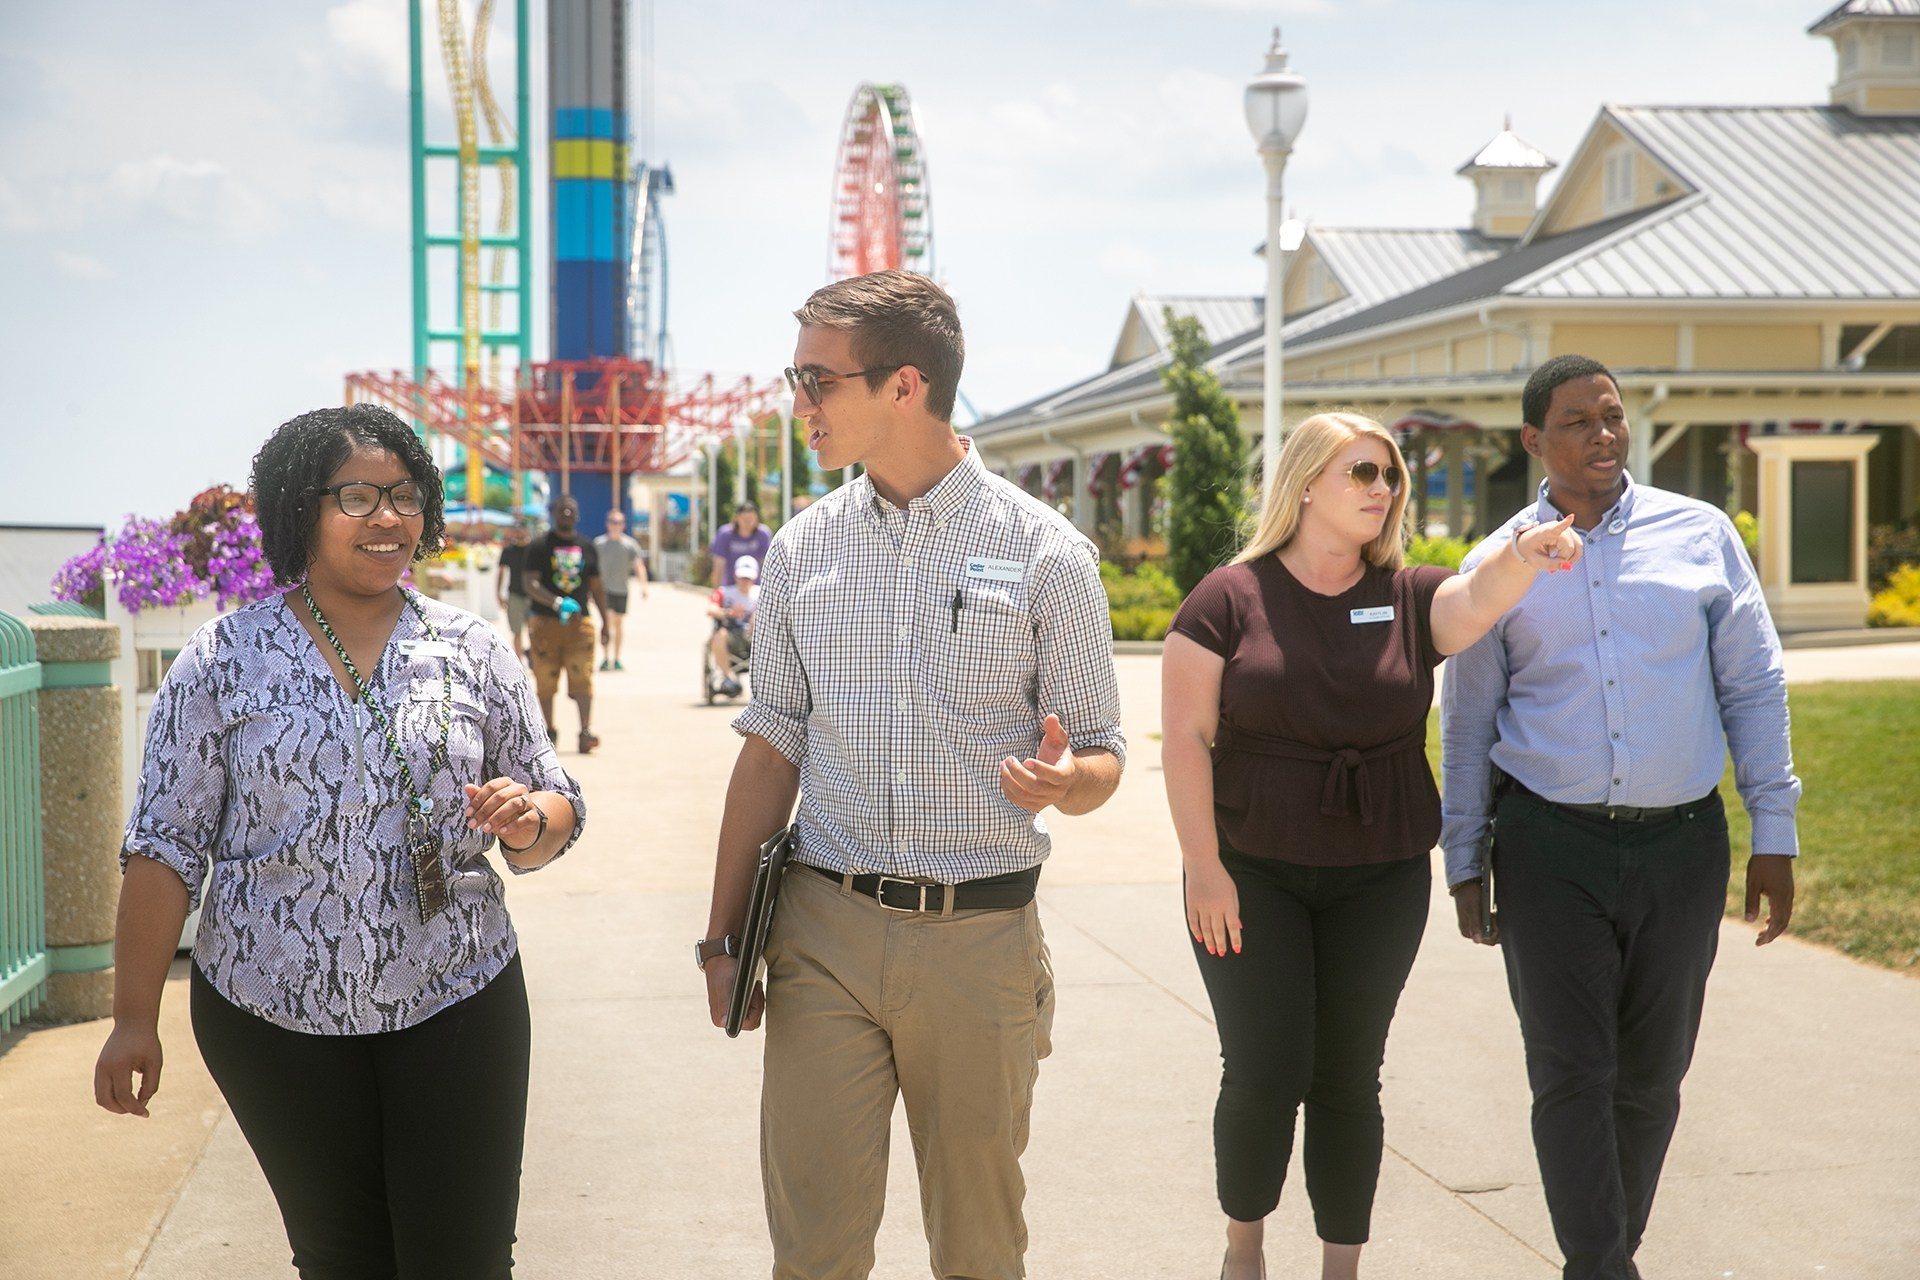 BGSU resort and attractions management students learning on the promenade at Cedar Point theme park in Sandusky, Ohio.